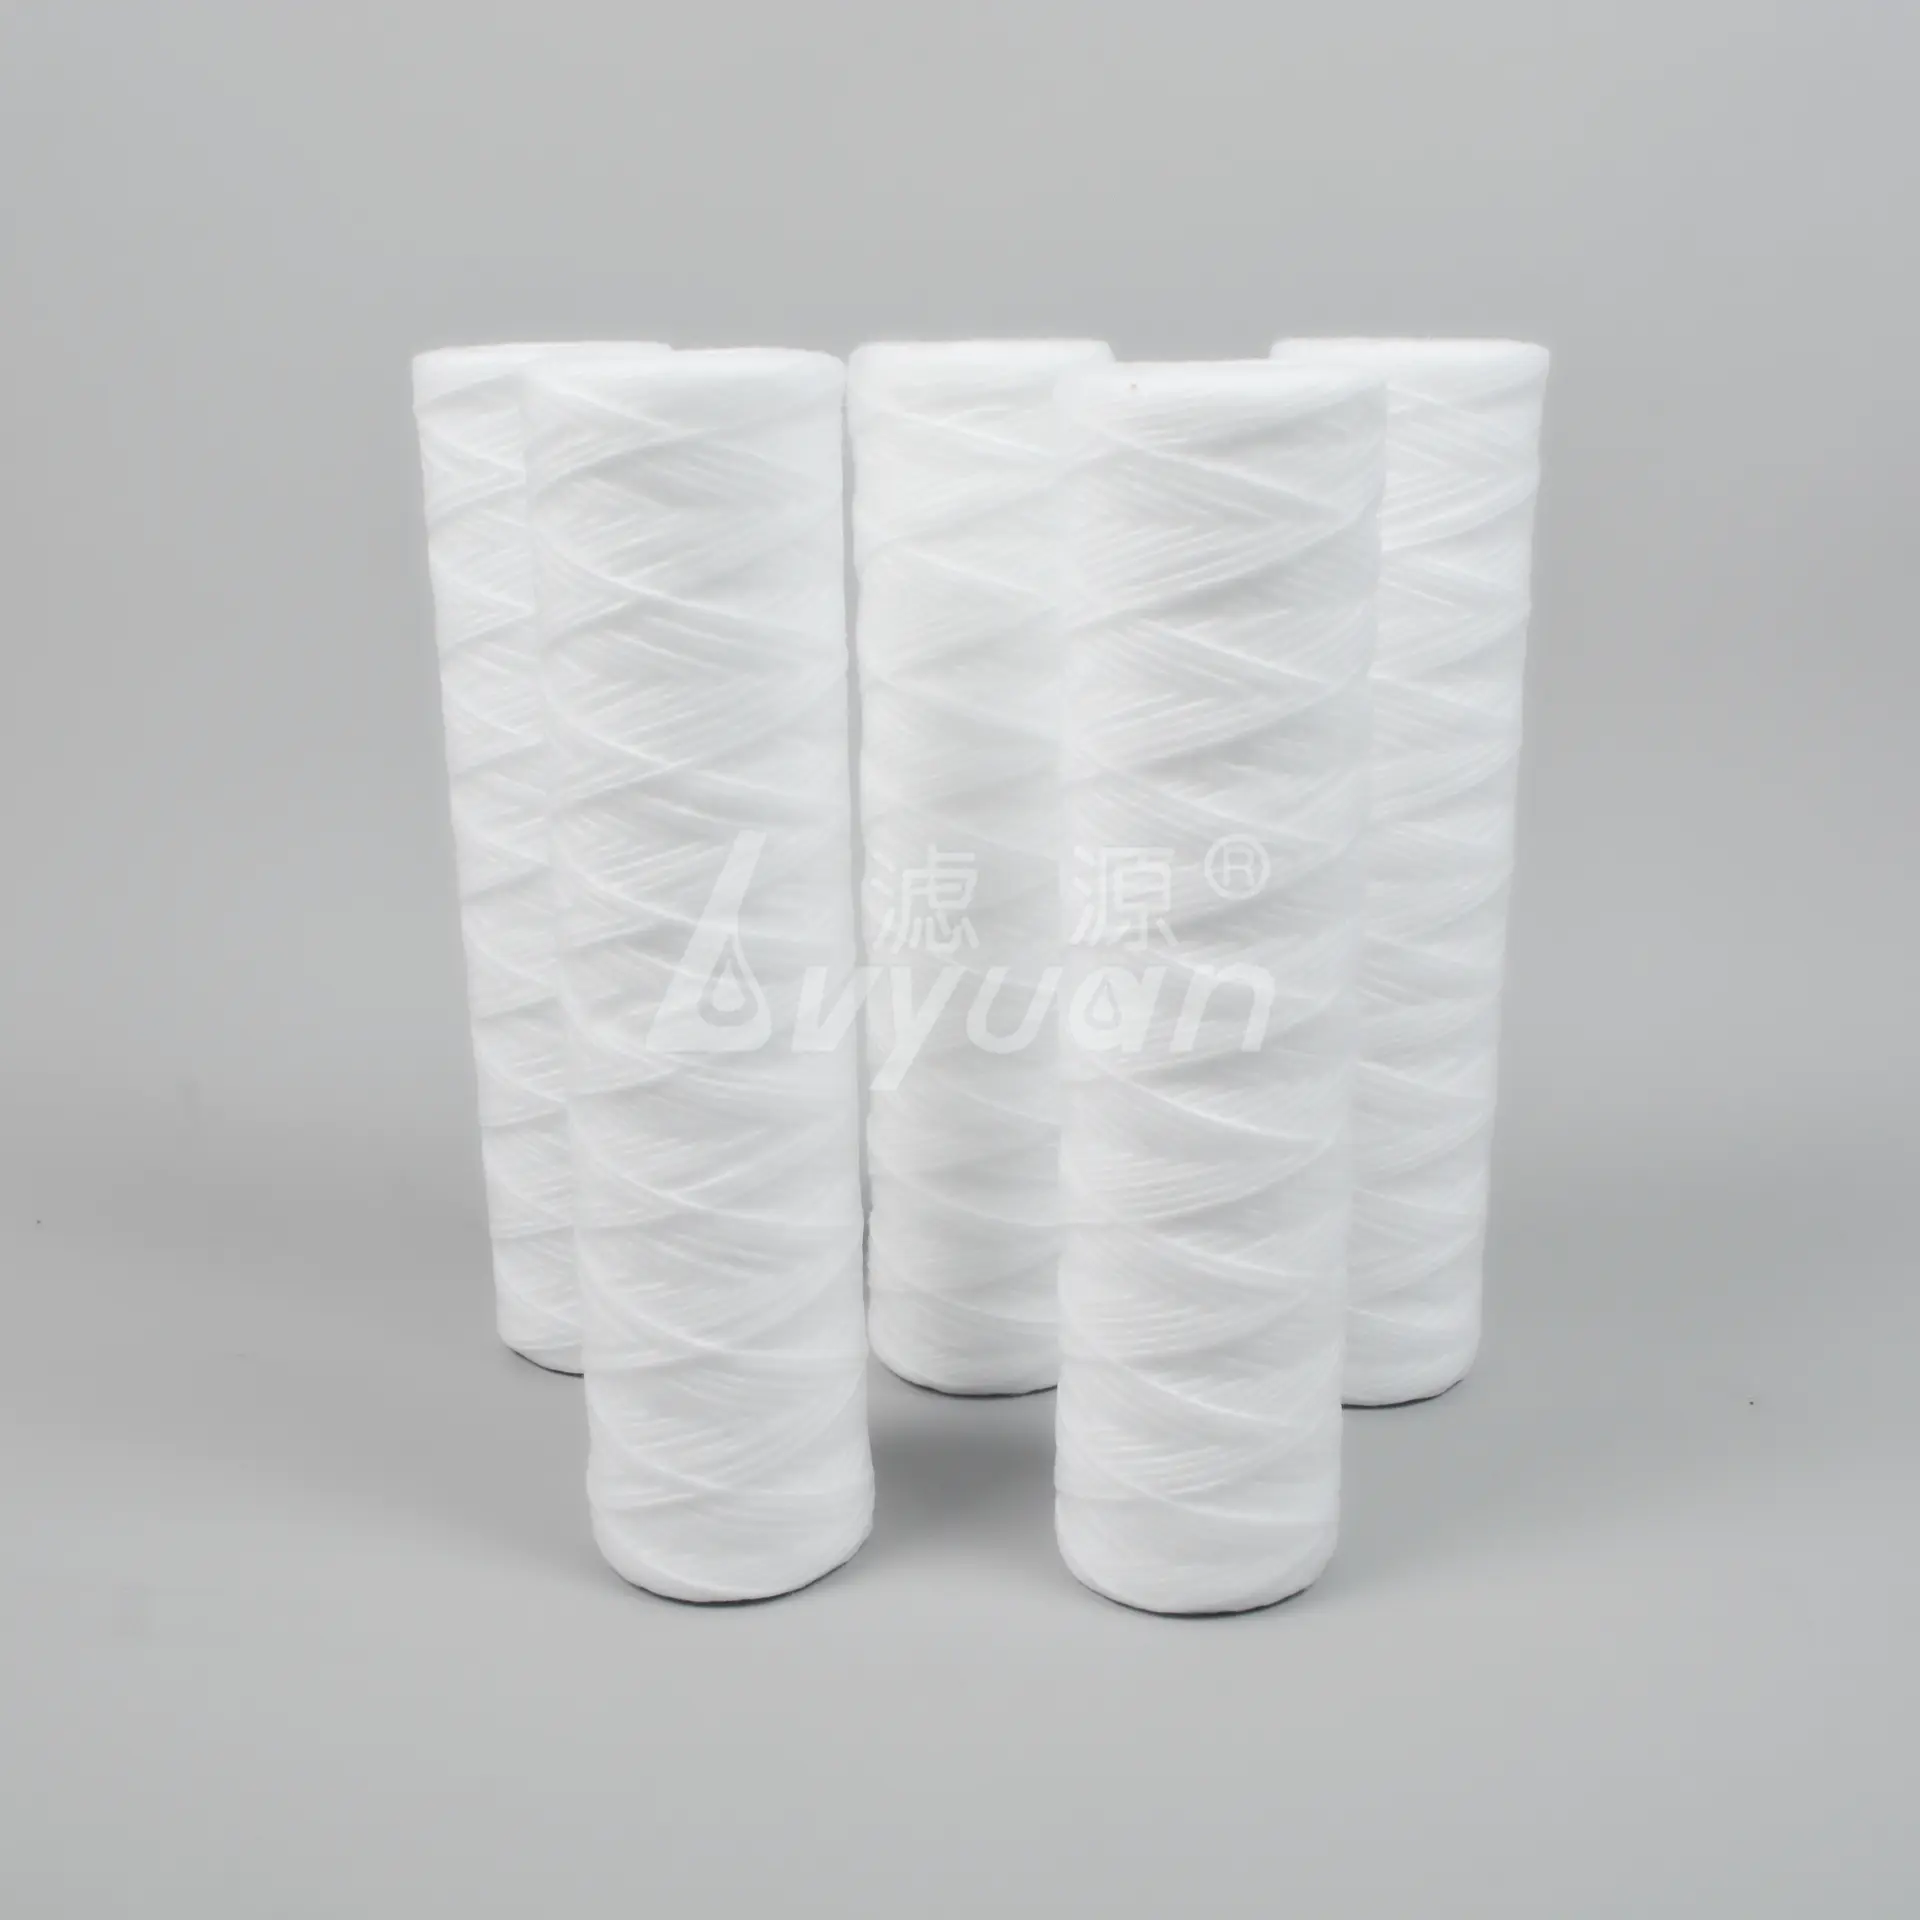 wound filter/fiberglass/cotton wound sedimentFilter Cartridge for food and beverage filtration